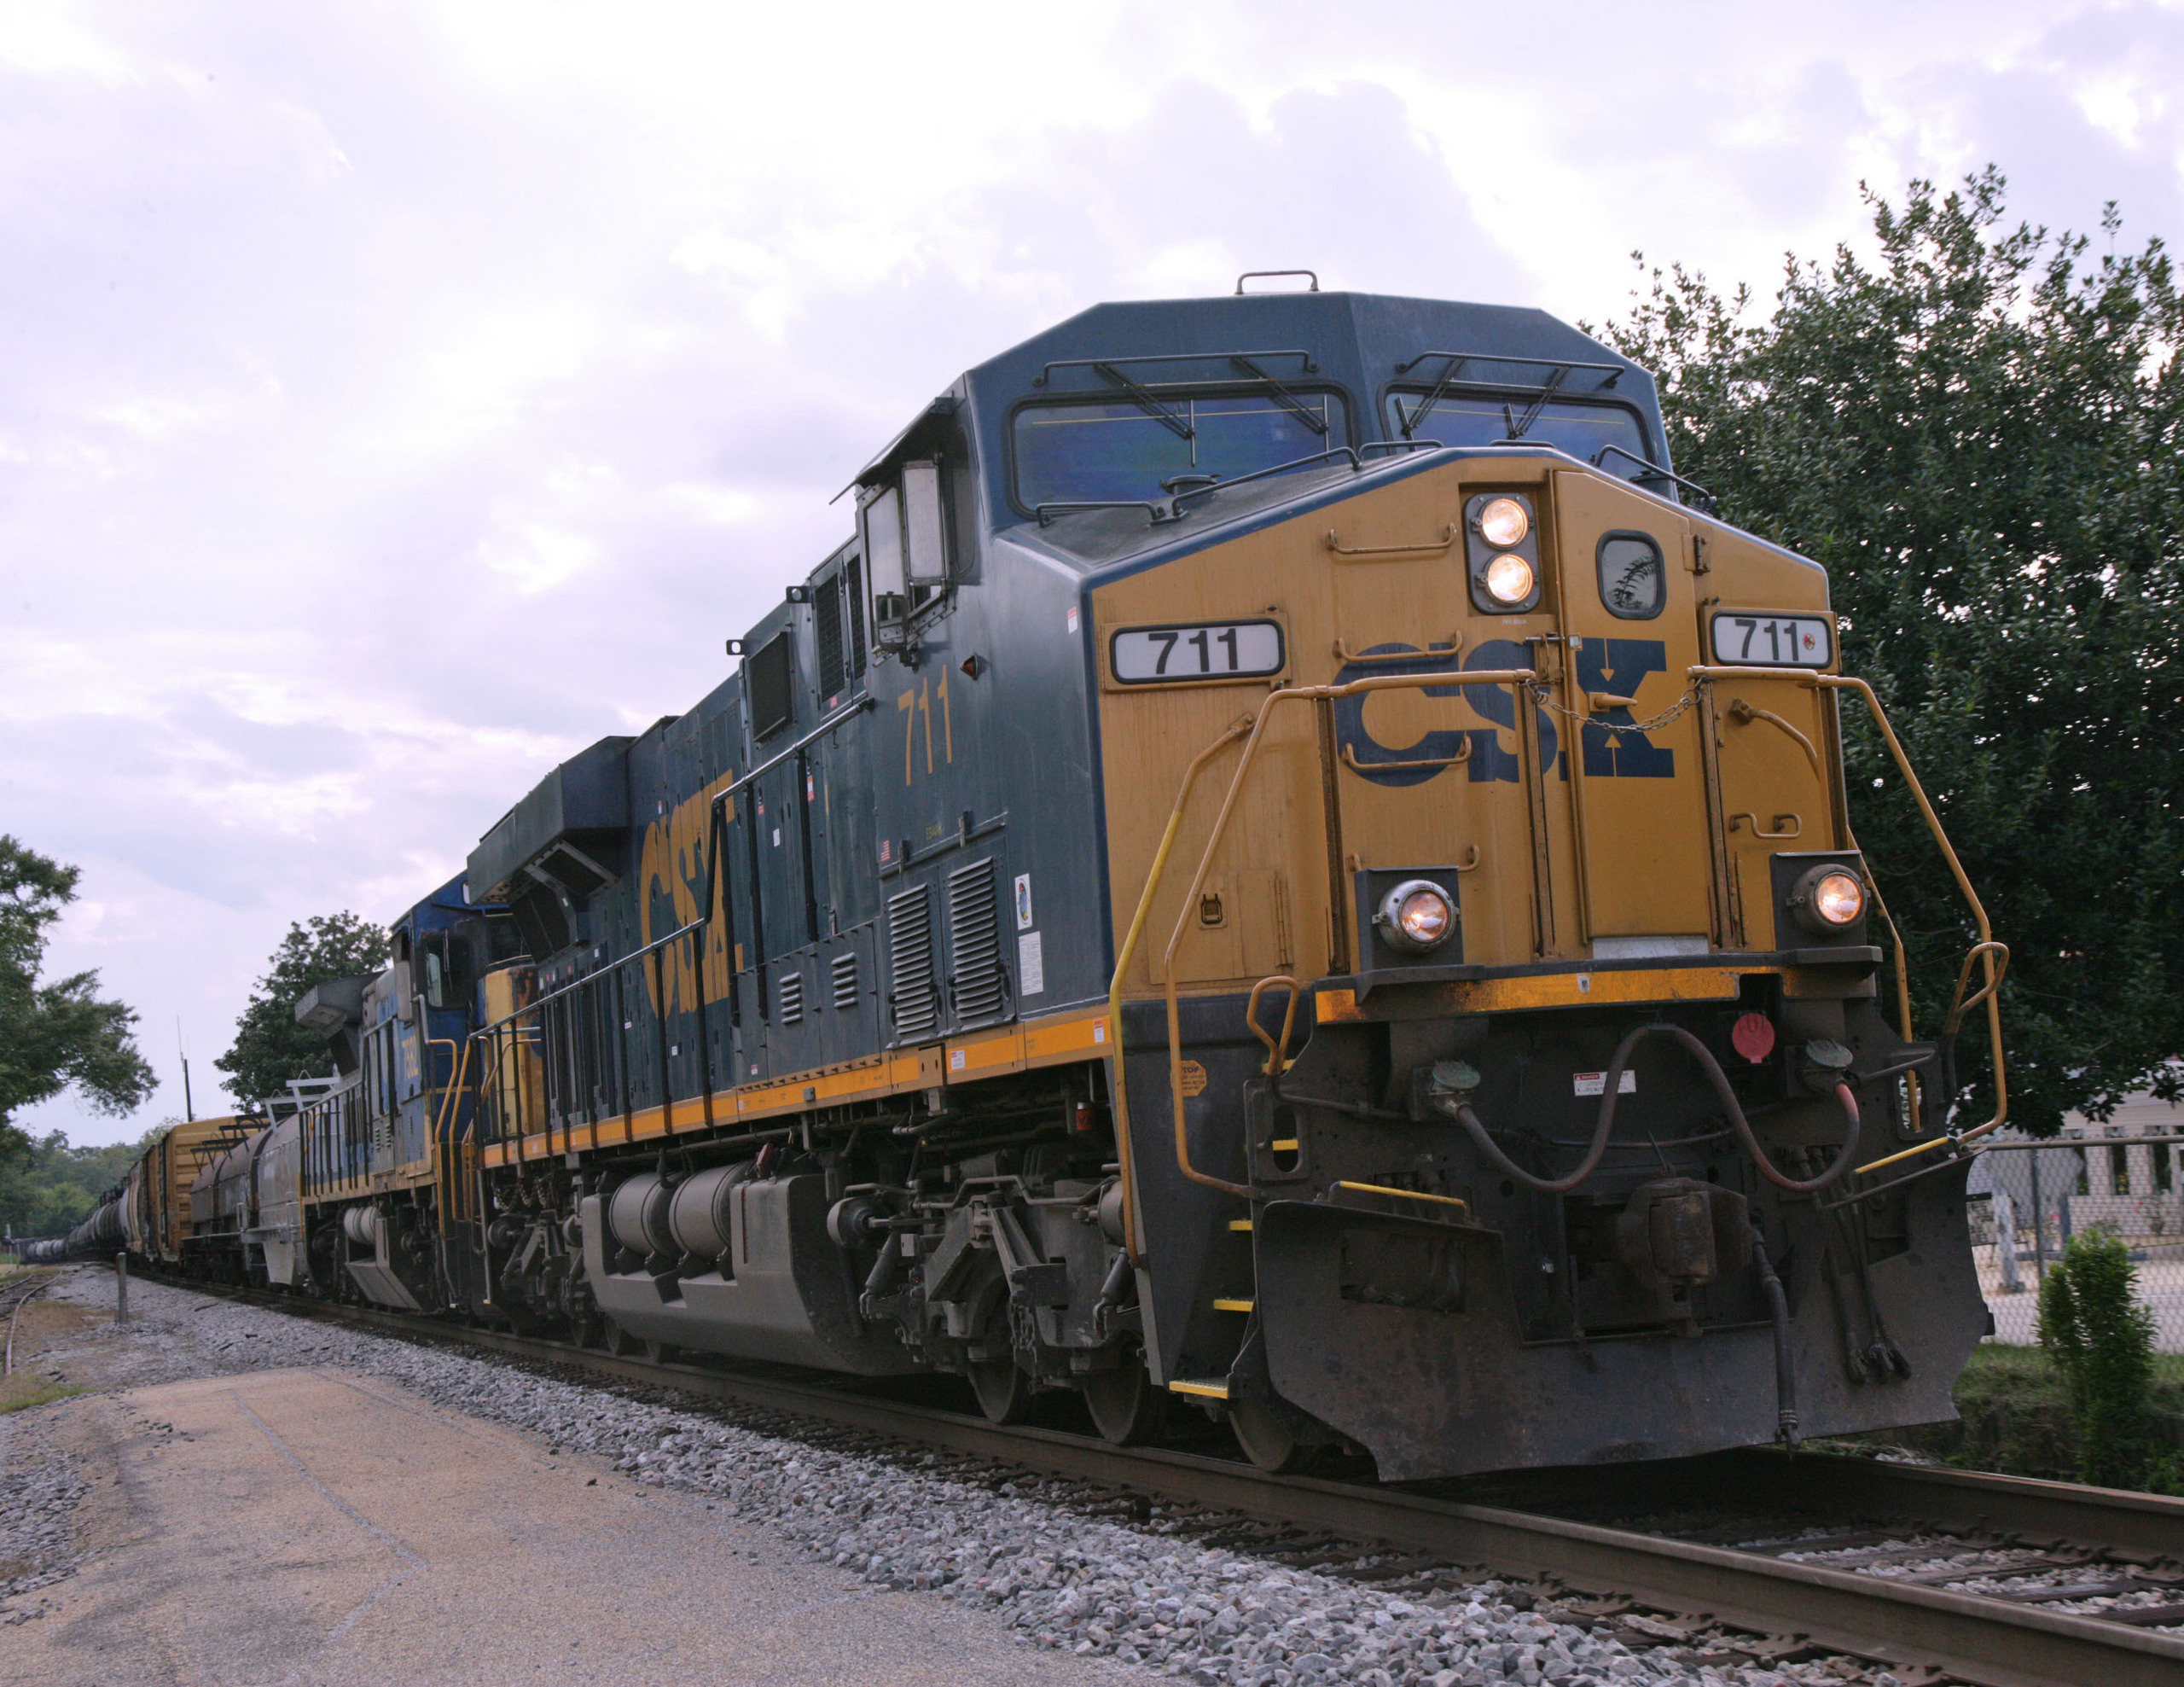 Trains Image Csx HD Wallpaper And Background Photos